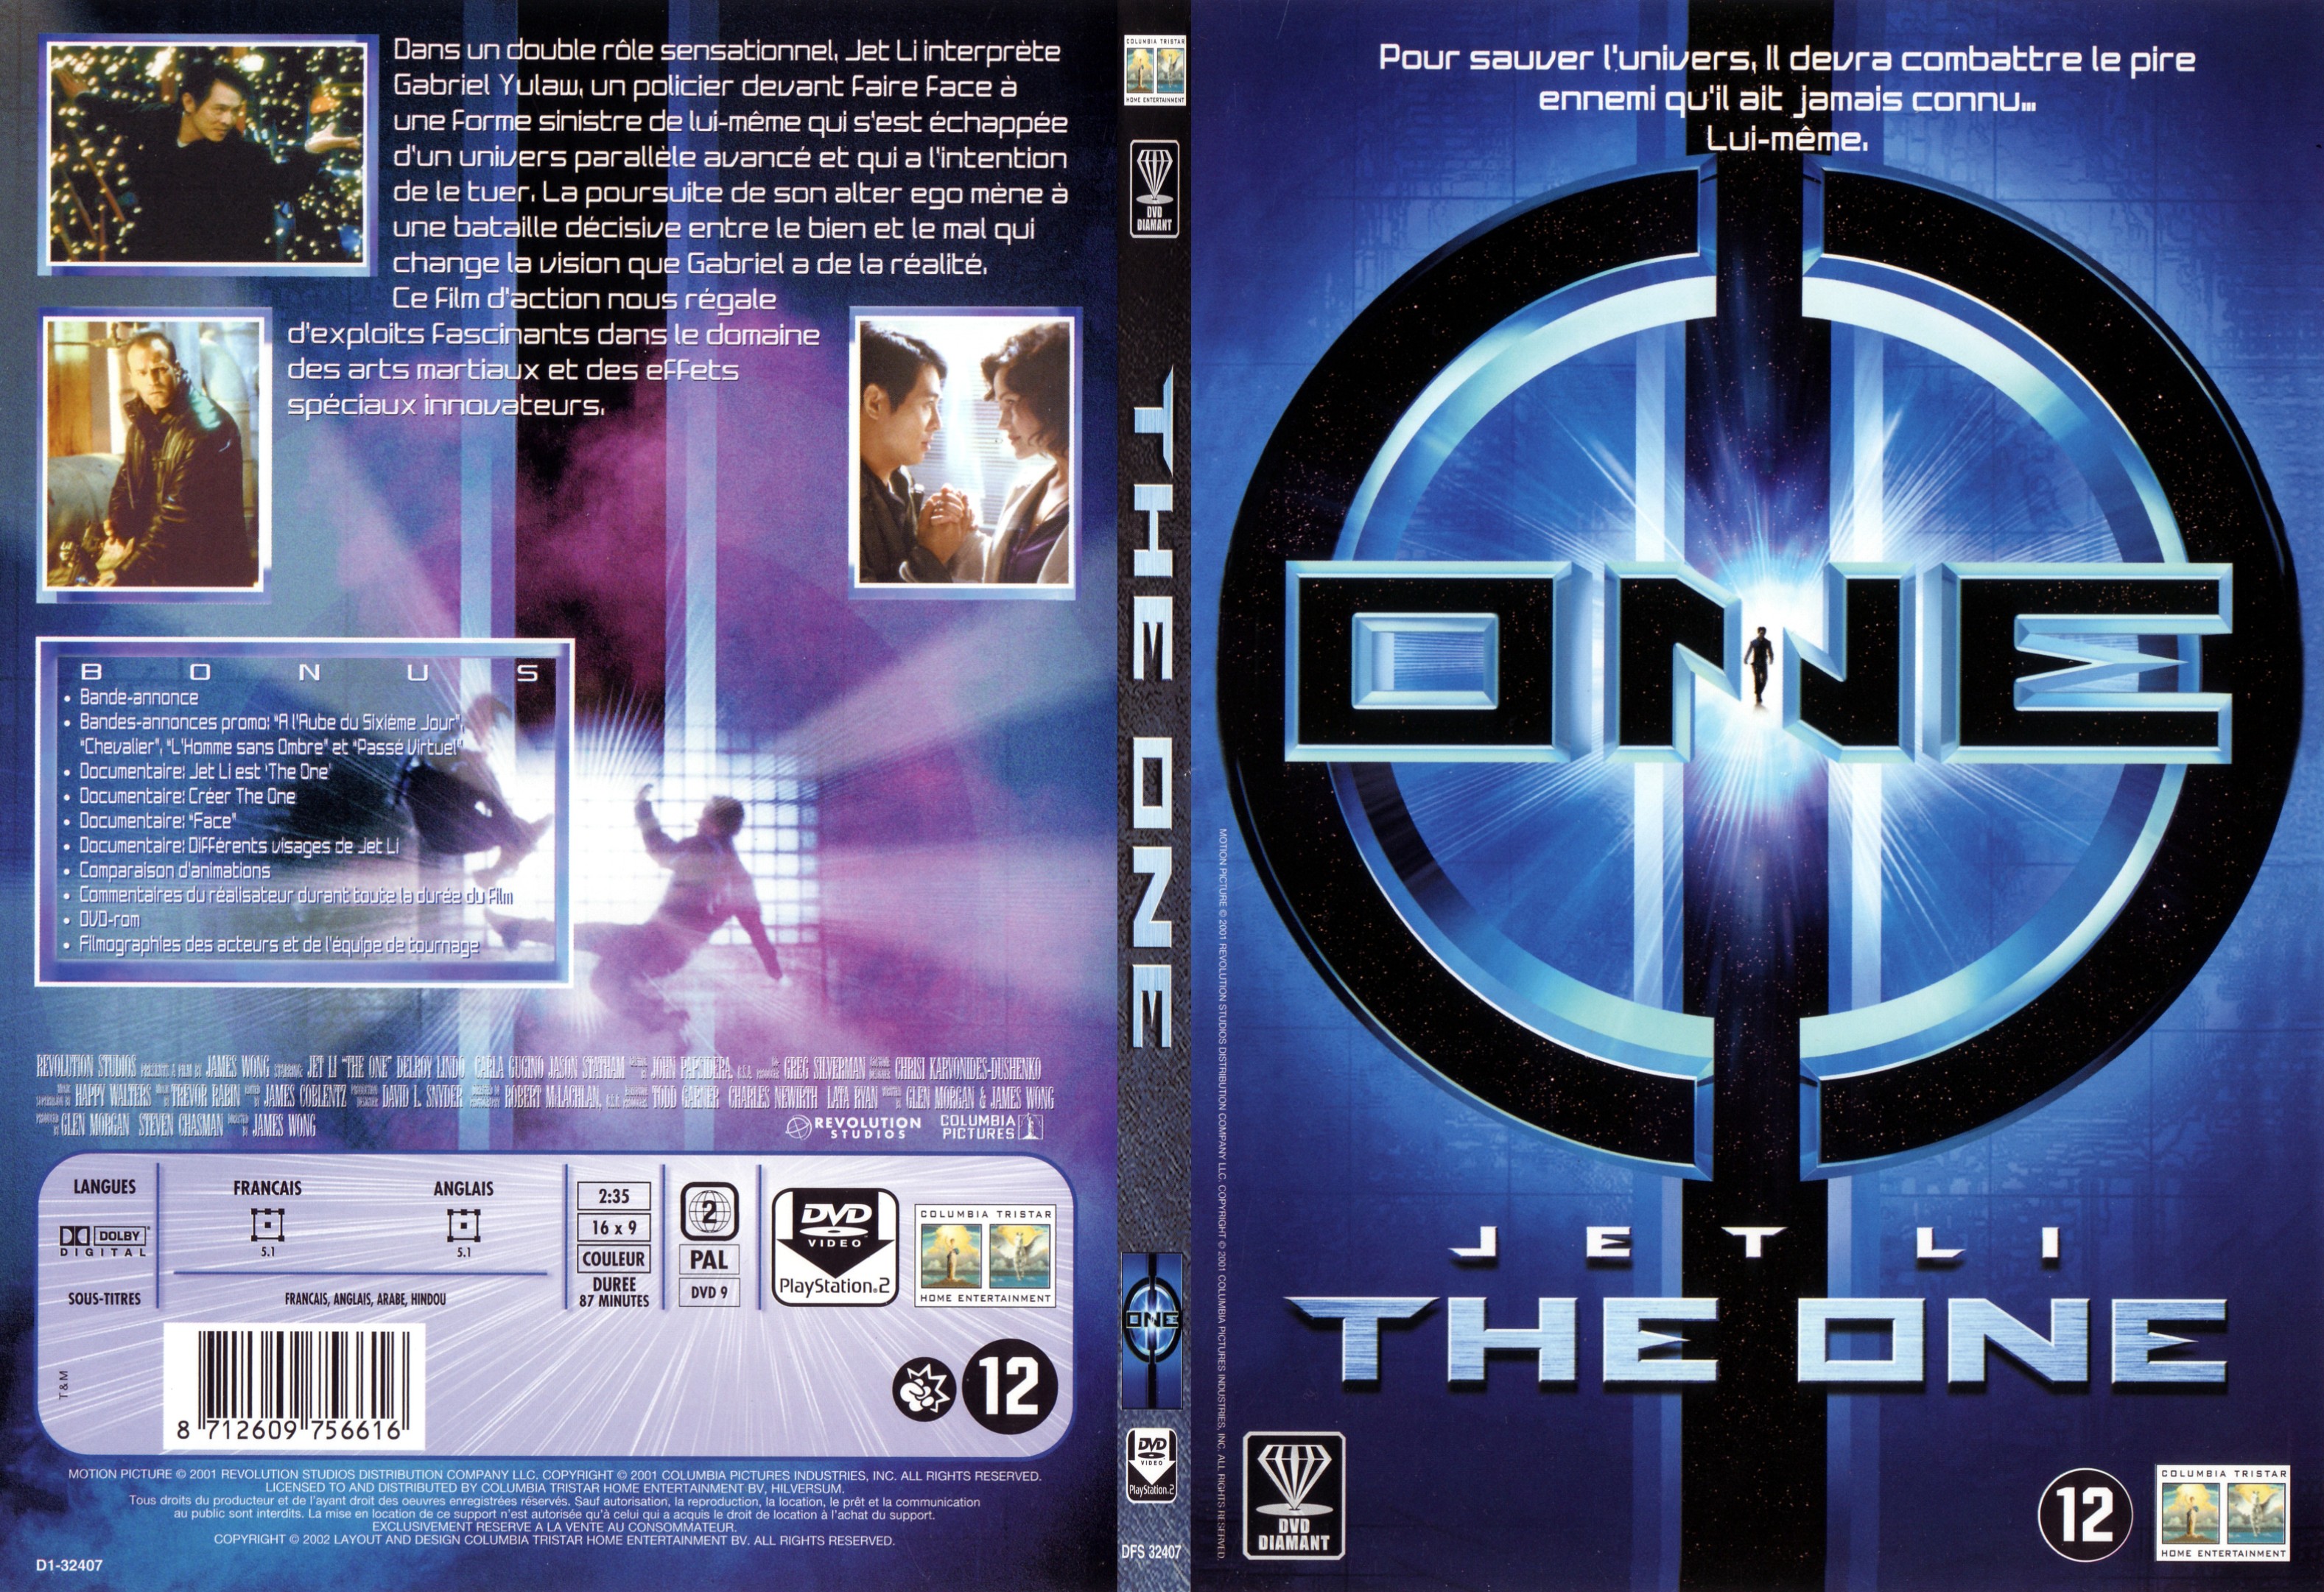 Jaquette DVD The one - SLIM